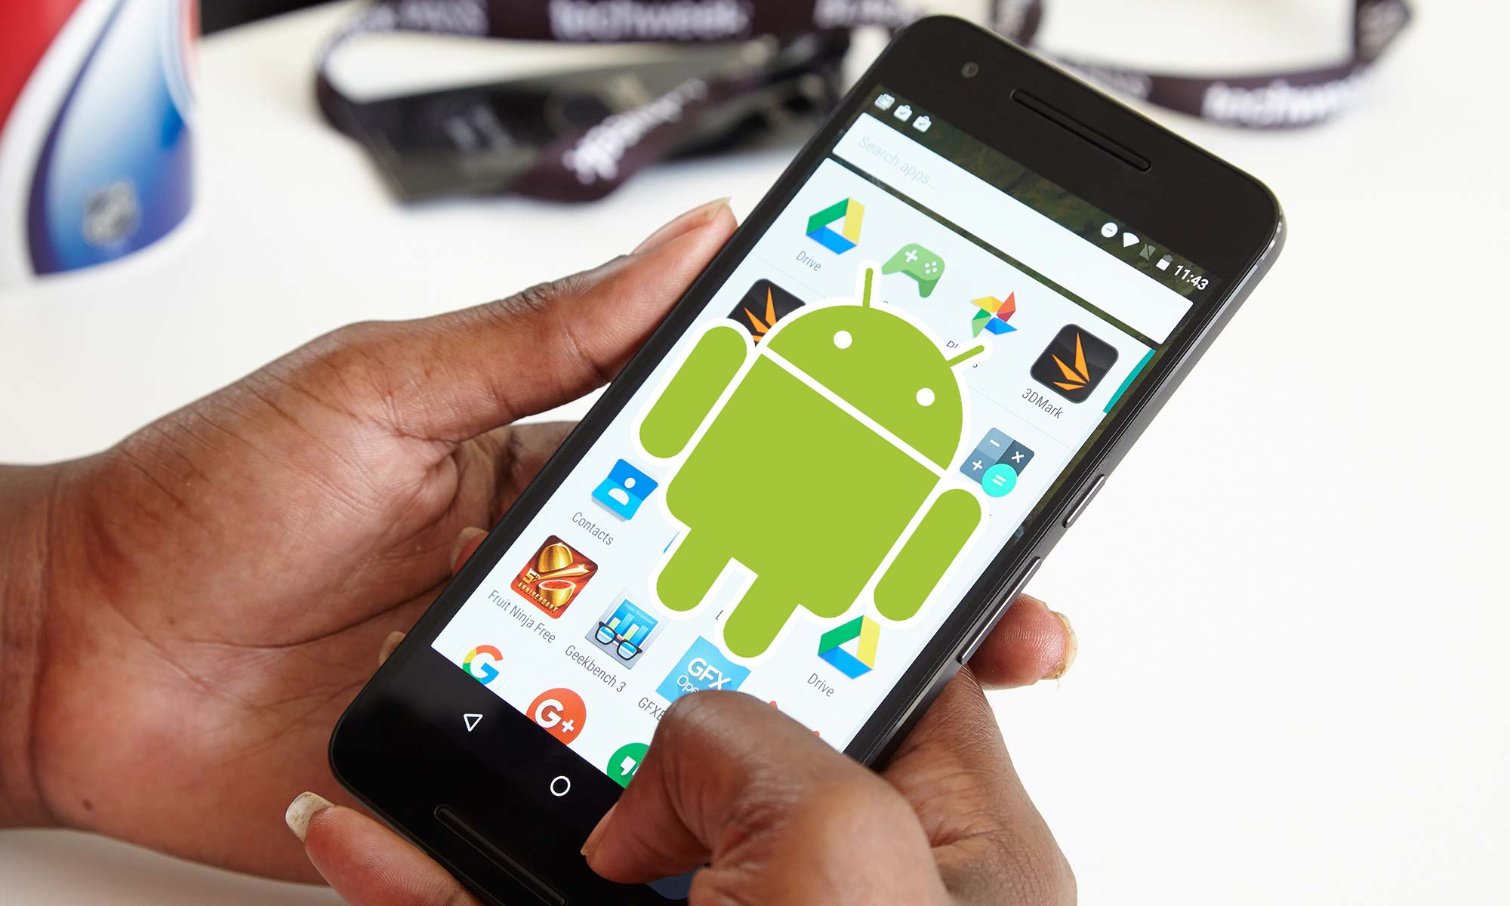 Android: Google Now launcher will disappear by the end of March